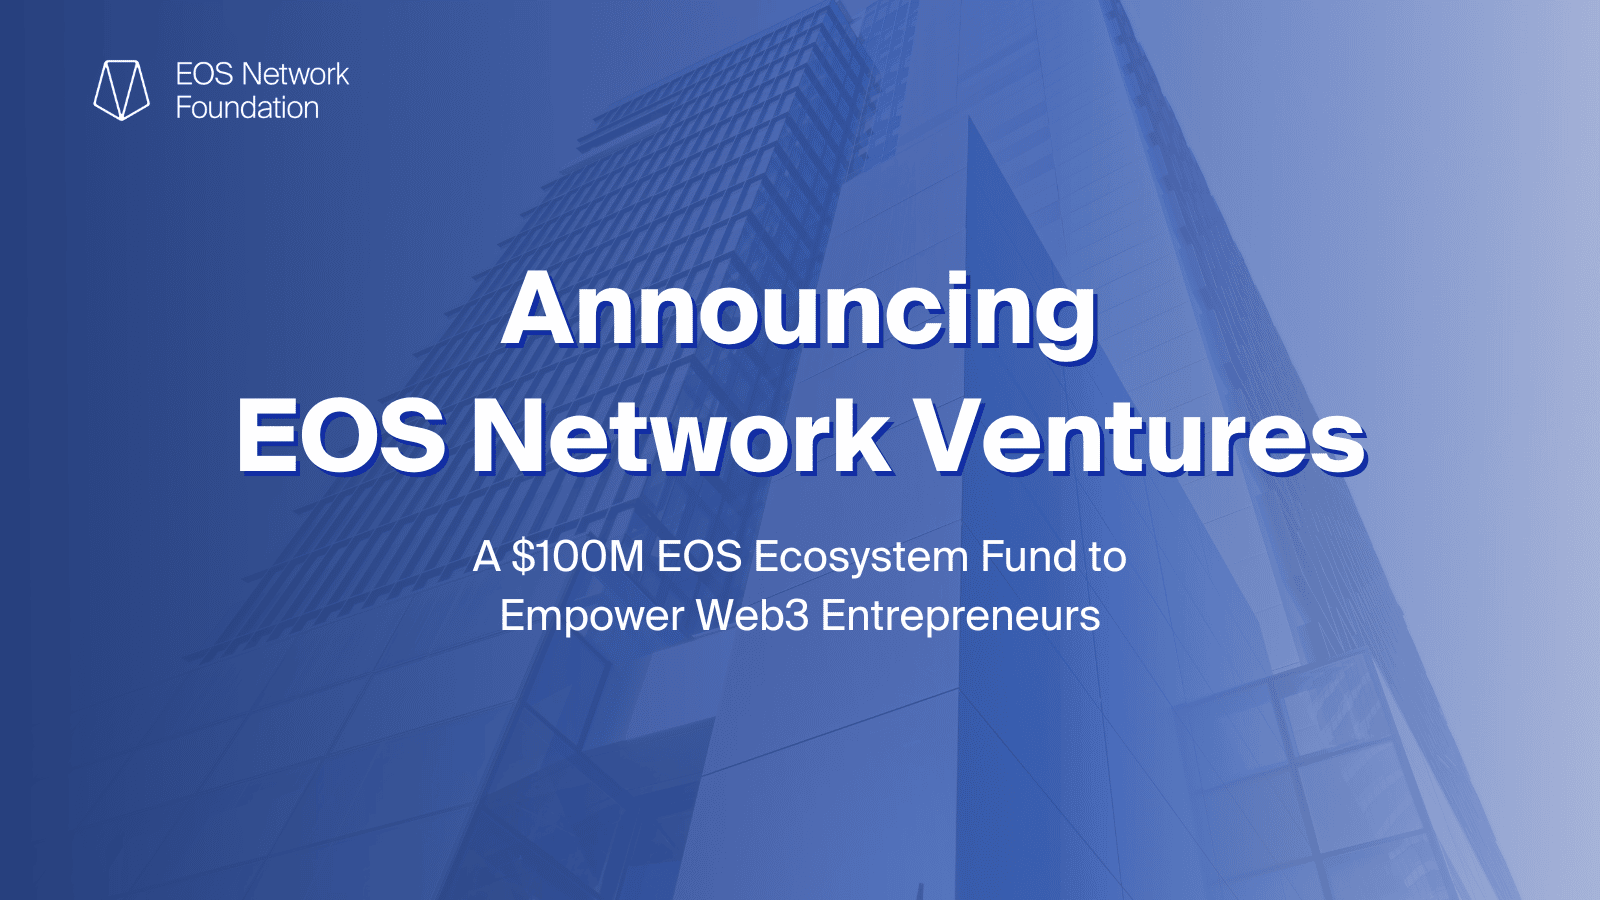 EOS Network Ventures to Launch $100m EOS Ecosystem Fund to Empower Web3 Entrepreneurs